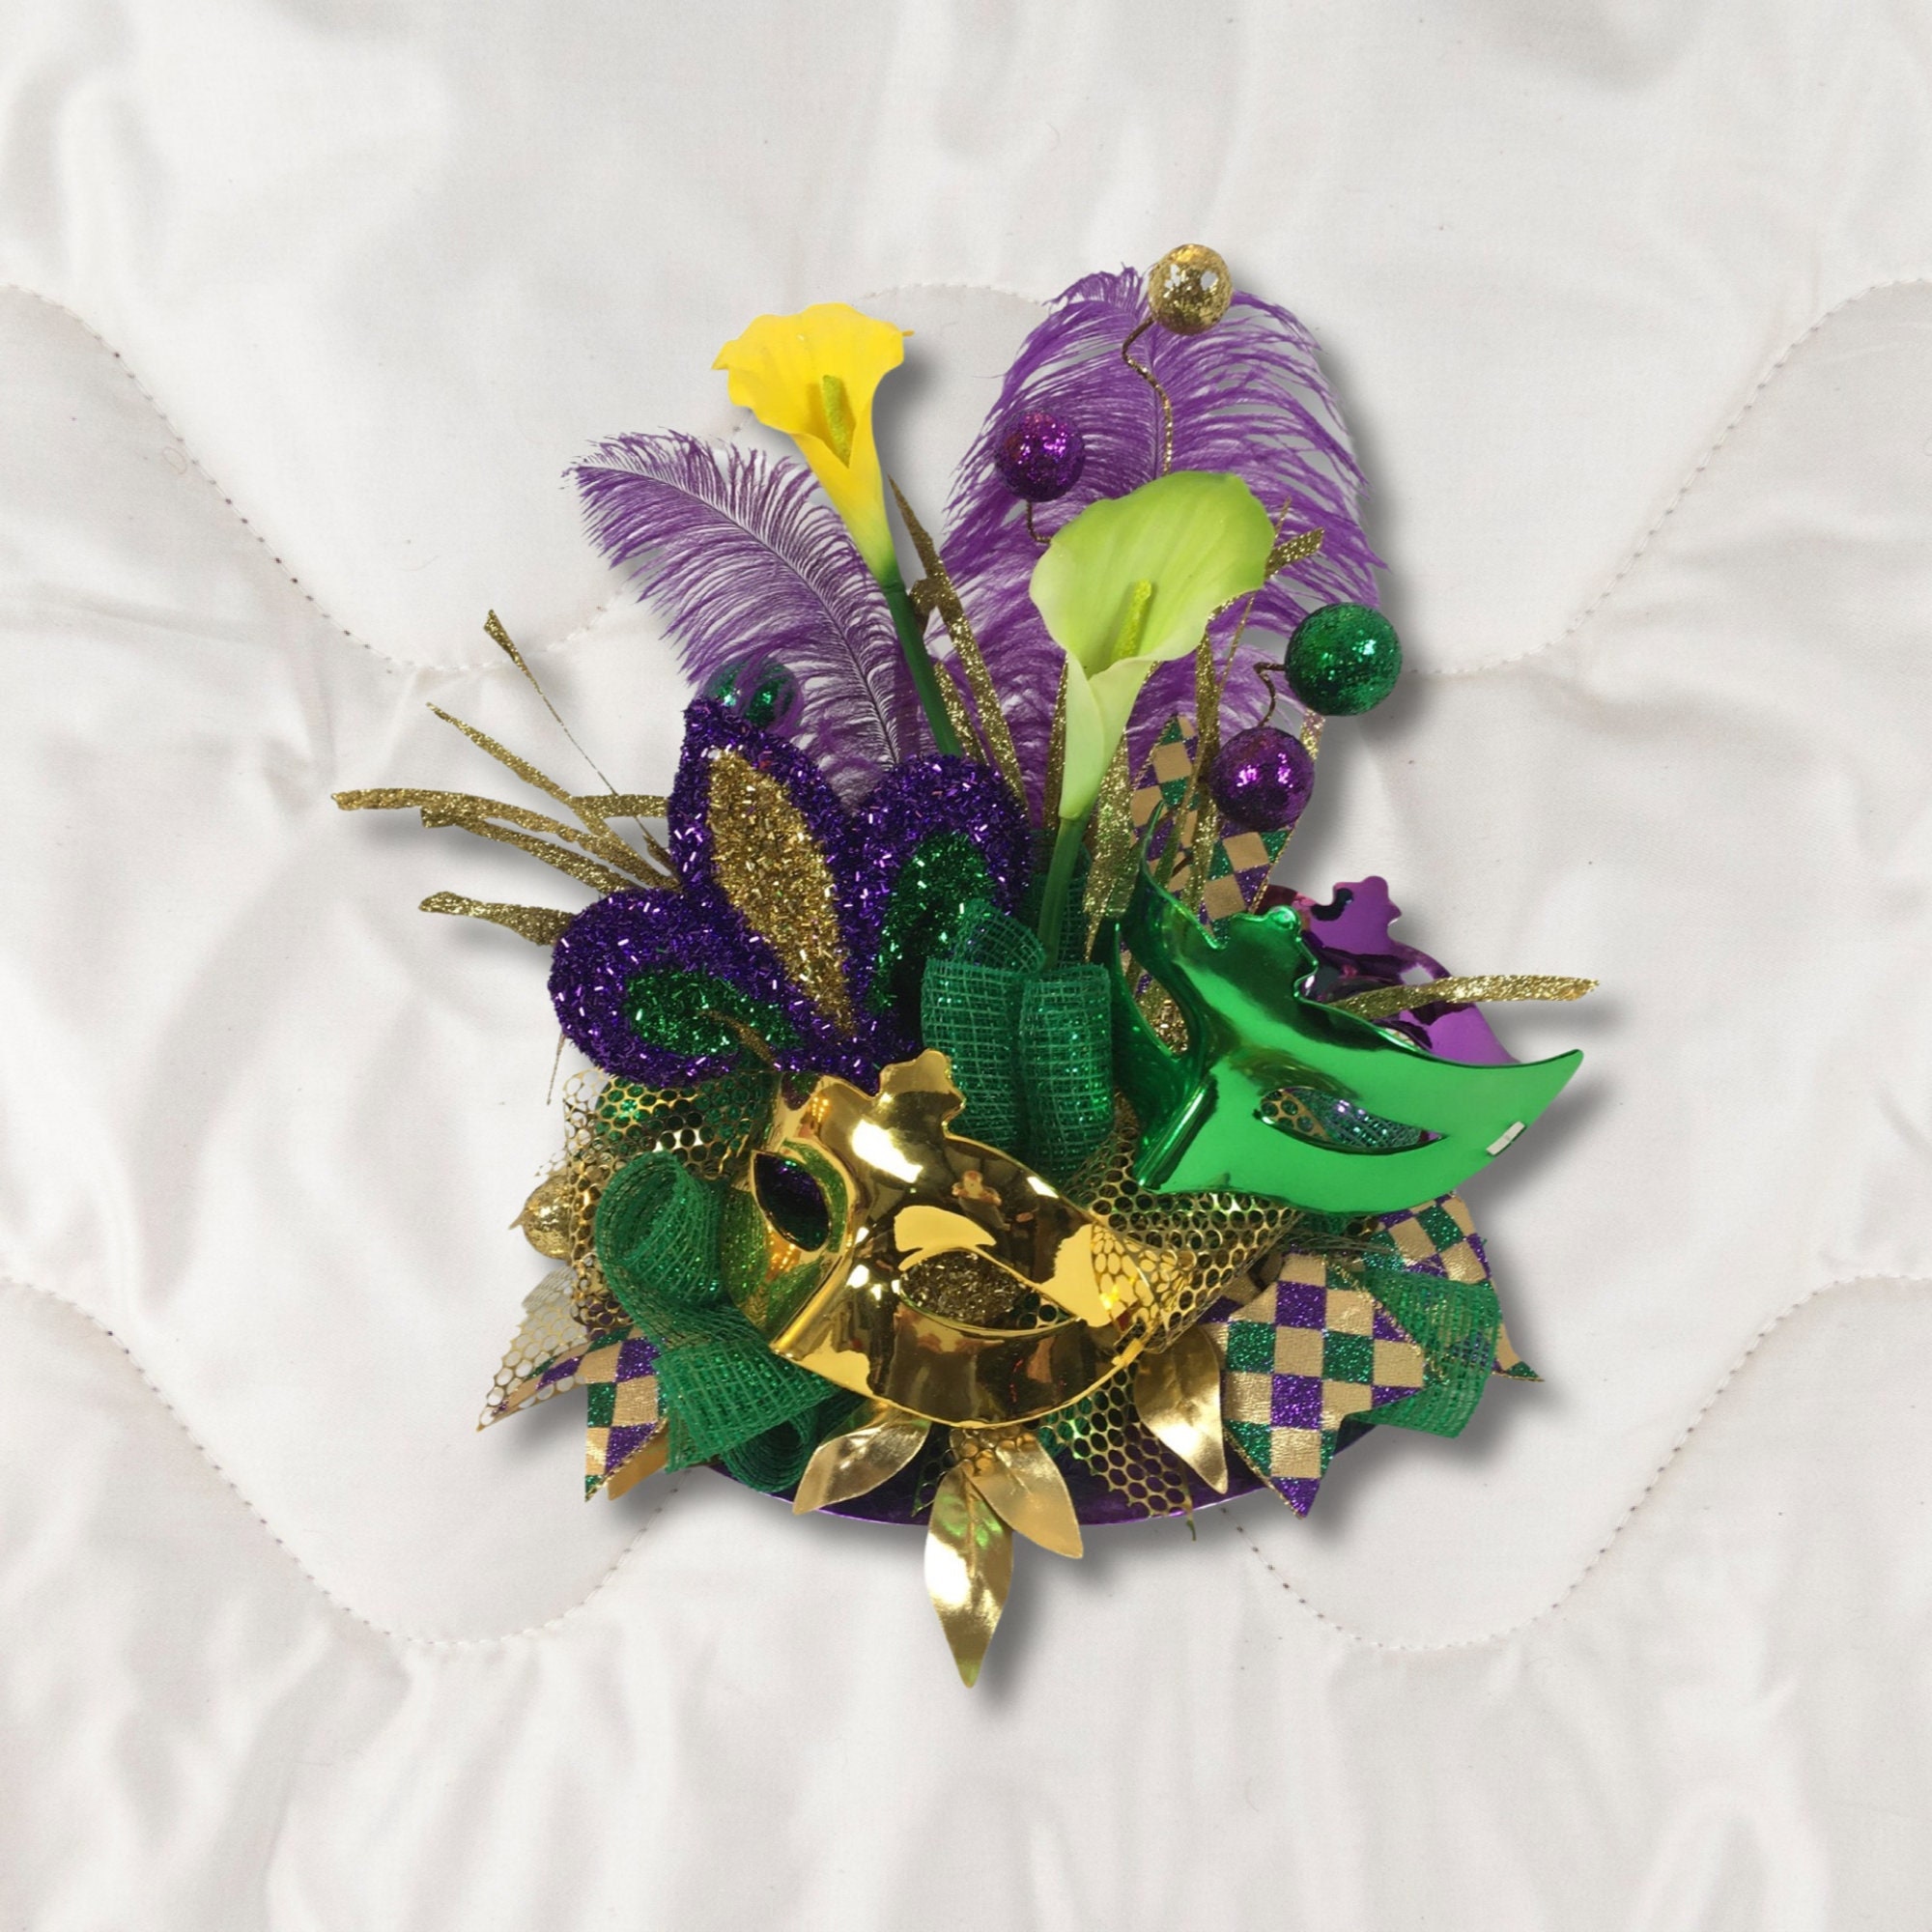  Brazilian Mardi Gras Celebration Christmas Ceramic Ornament  2023,3 Round Xmas Tree Hanging Accessories with Gold Ribbon,Carnival Mask  Feather on Purple Ornaments Home Party Decor : Home & Kitchen